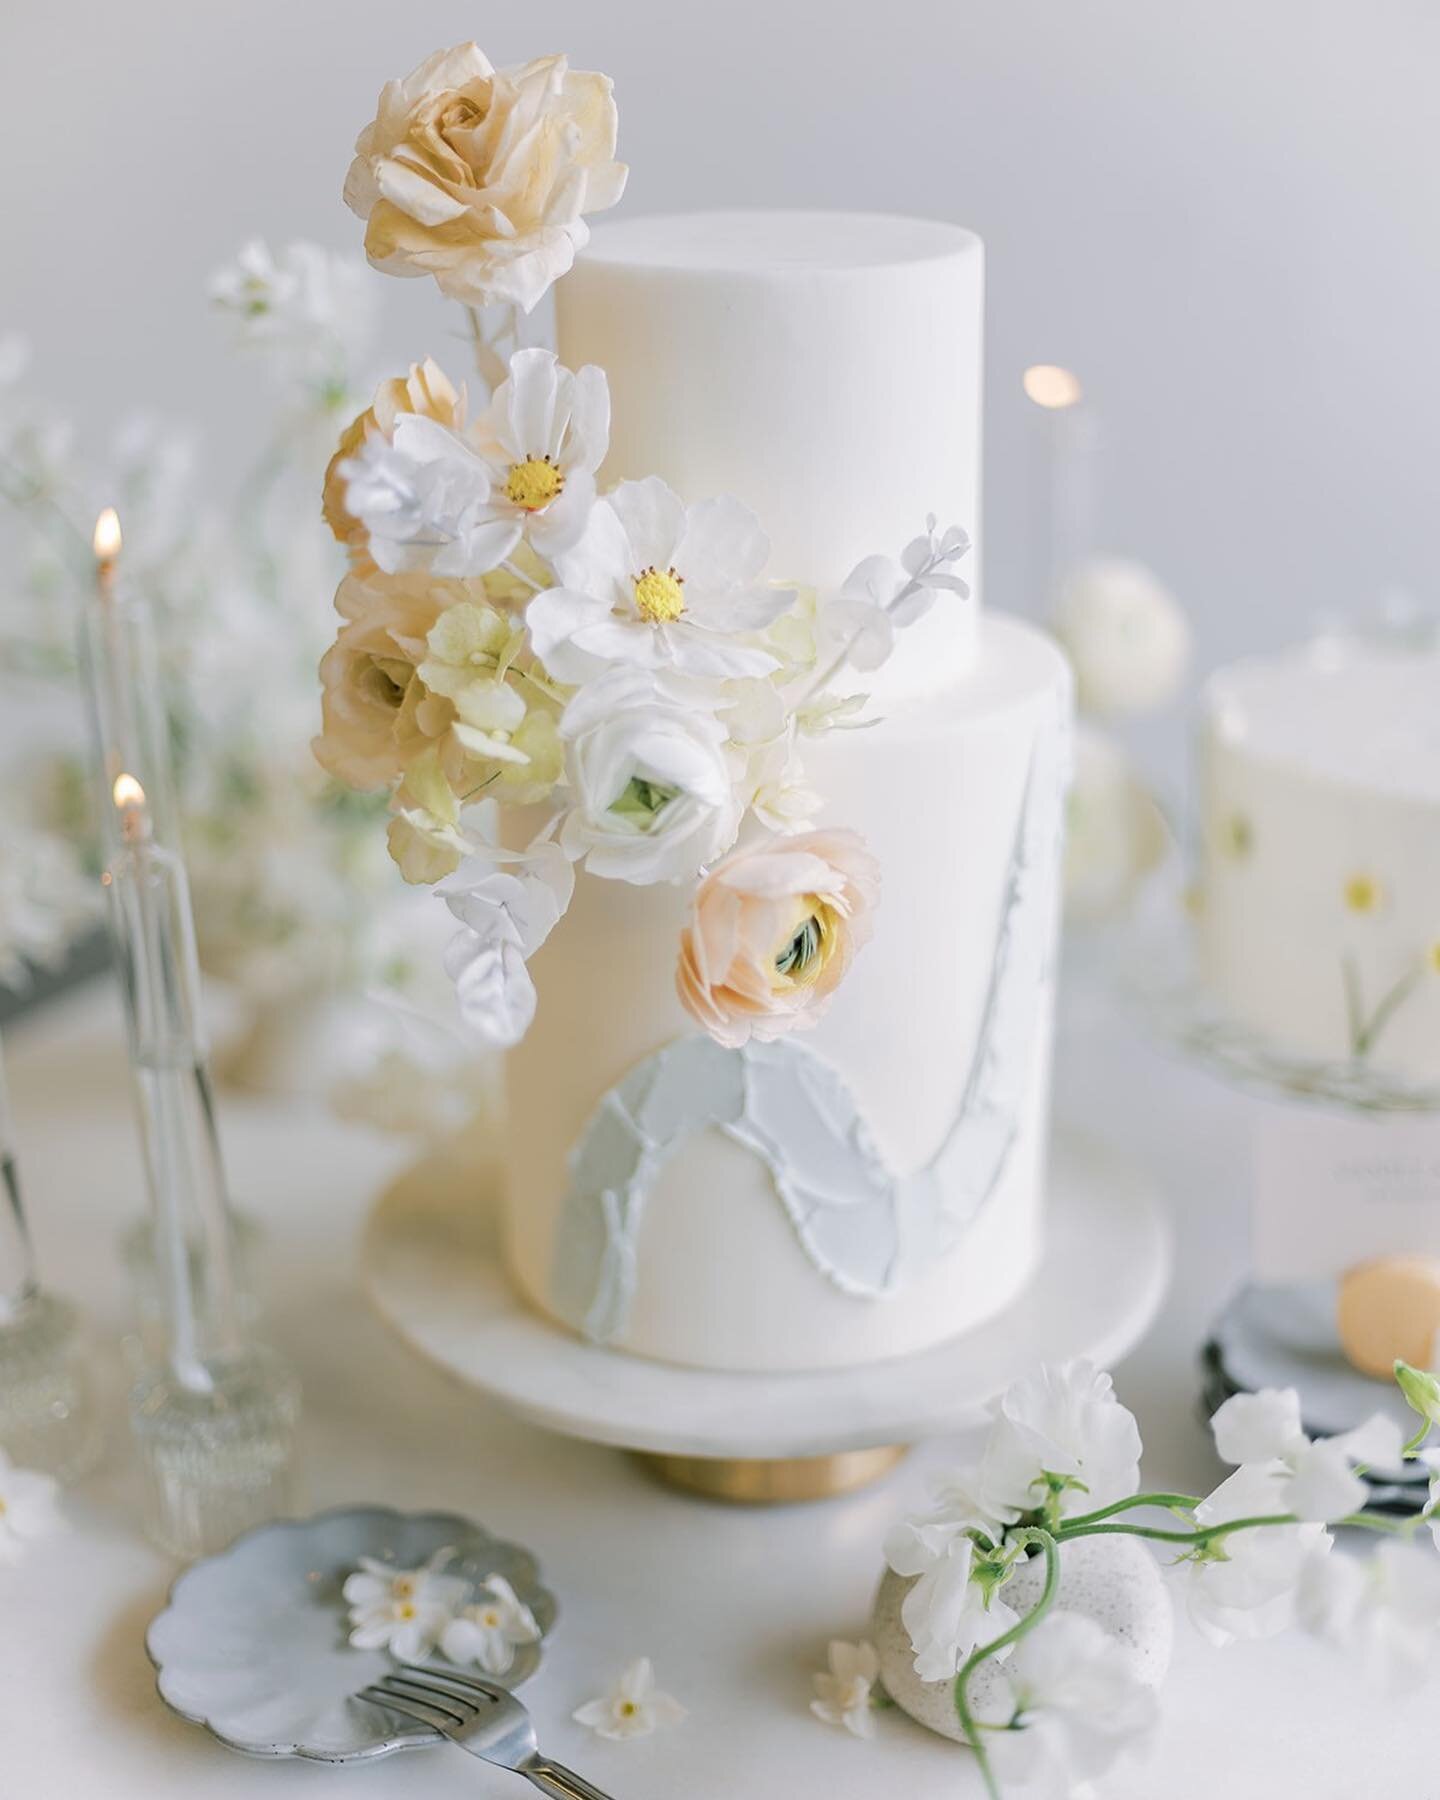 Cake with wafer paper flowers and blue accent! Back to work this week and excited to share more! 

⁠
⁠Photography: @danitoscanophoto⠀
Beauty: @beautybystaceymua⠀
Florals: @sirenfloralco ⠀
Design &amp; Rentals: @catalogatelier @adorefolklore⠀
Paper Go